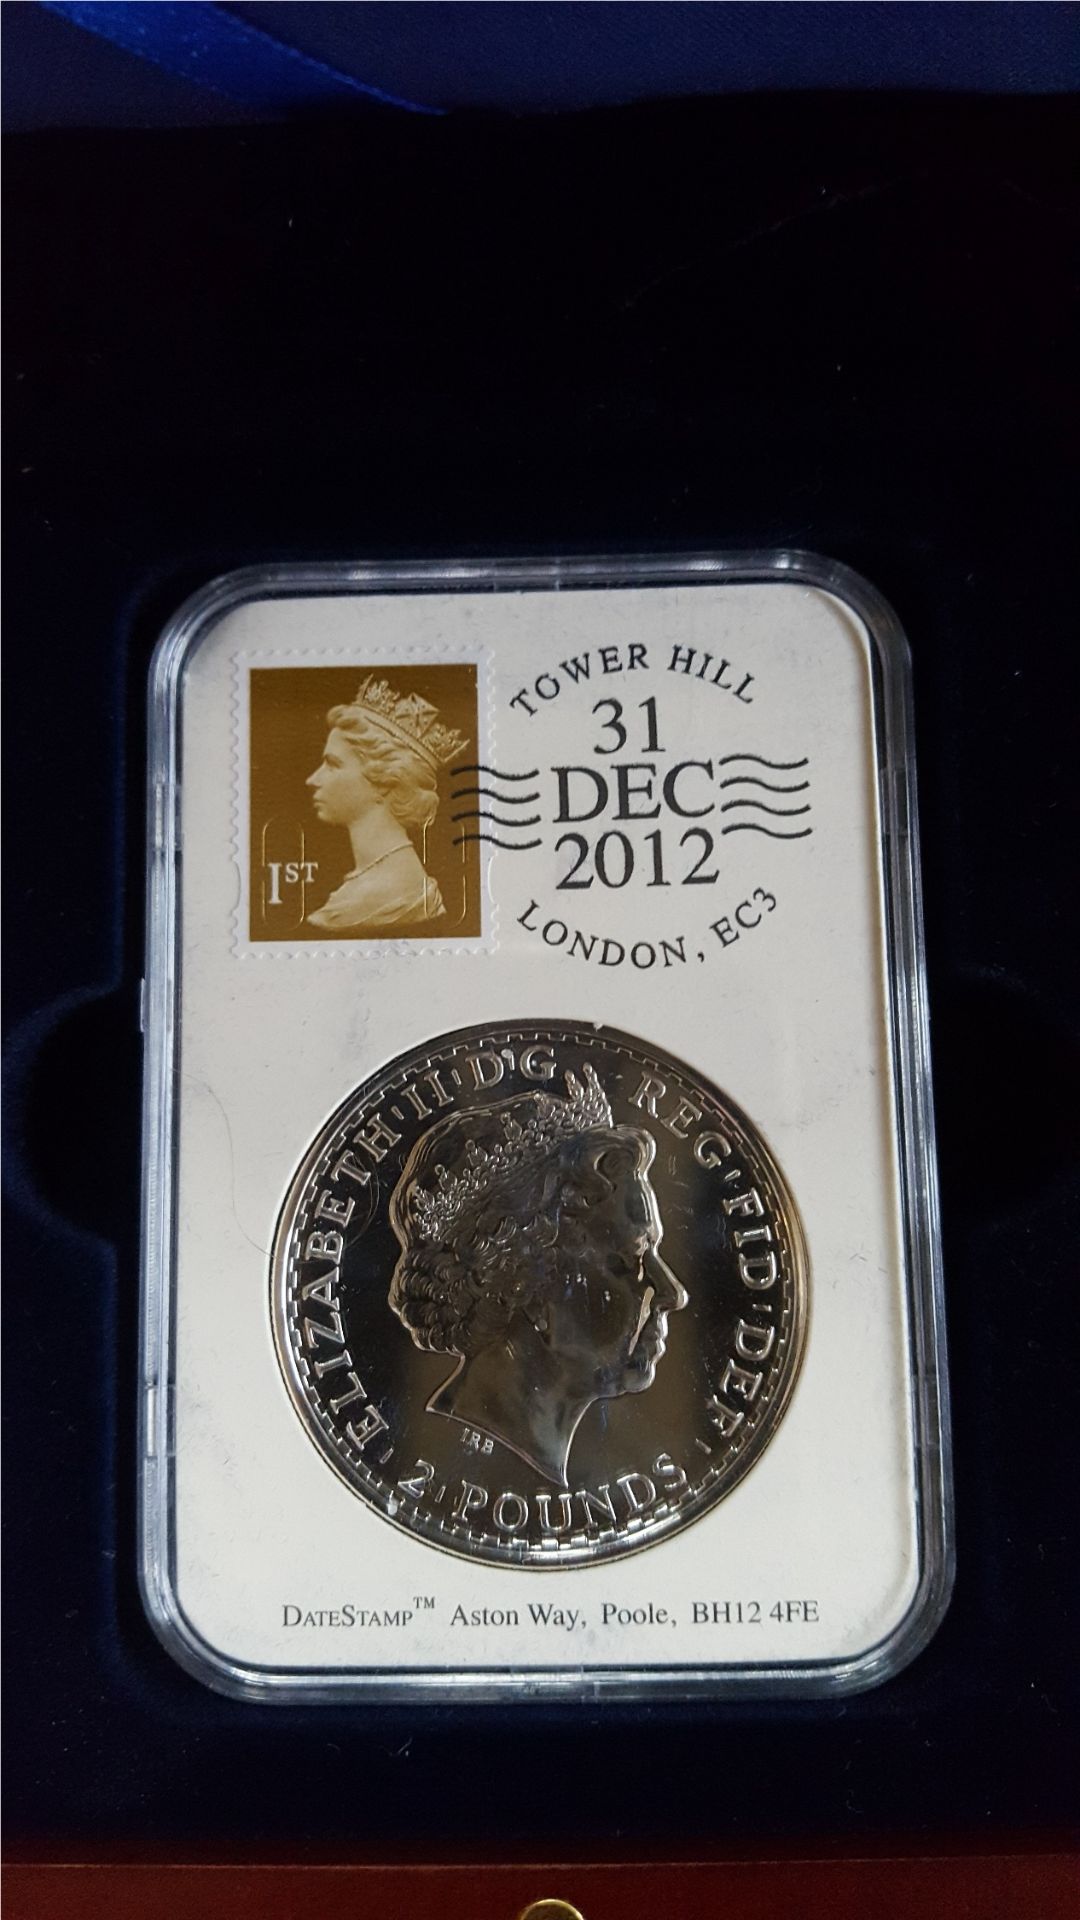 Collectable Coin 1983 UK Silver One Pound A15-0131 .925 Silver - Image 2 of 4